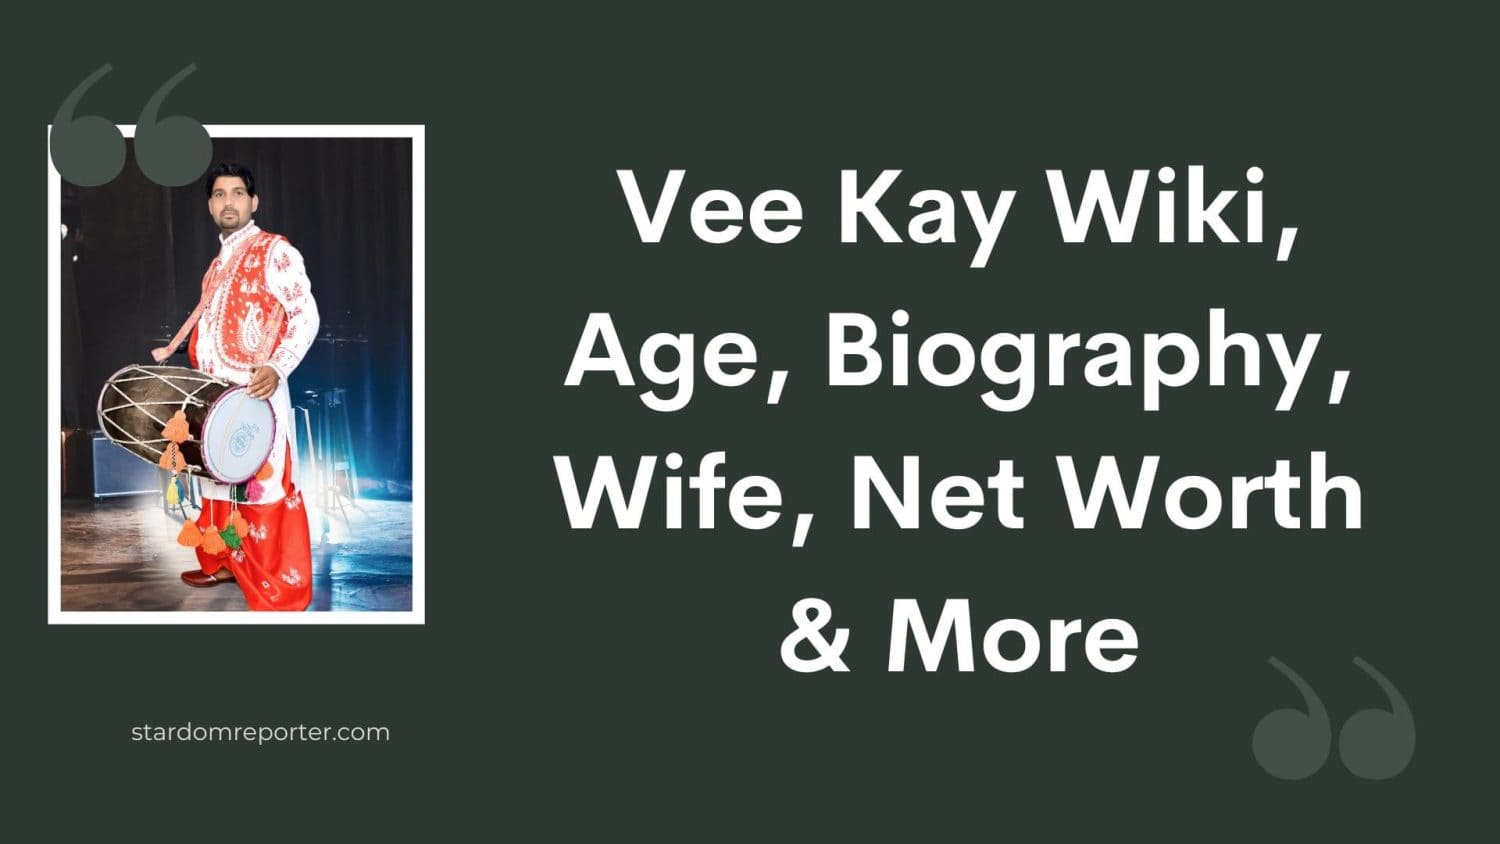 Vee Kay Wiki, Age, Biography, Wife, Net Worth & More - 13